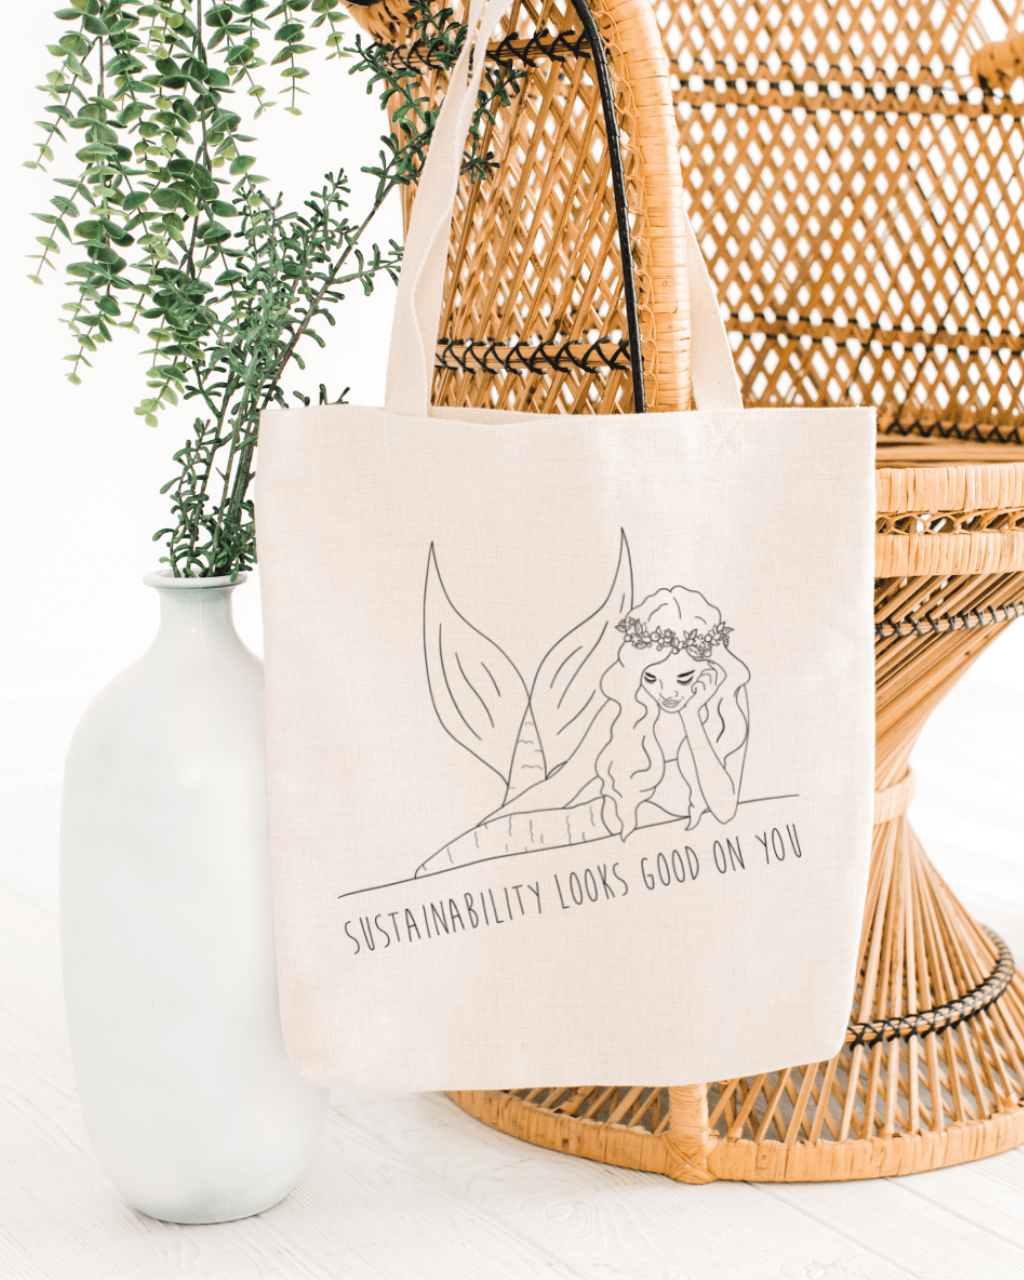 Tide + Seek sustainable swimwear tote bag hanging on a wicker bohemian style chair and pot planet. The bag is a cream colour with a mermaid on the front and slogan saying "sustainability looks good on you" across it.  